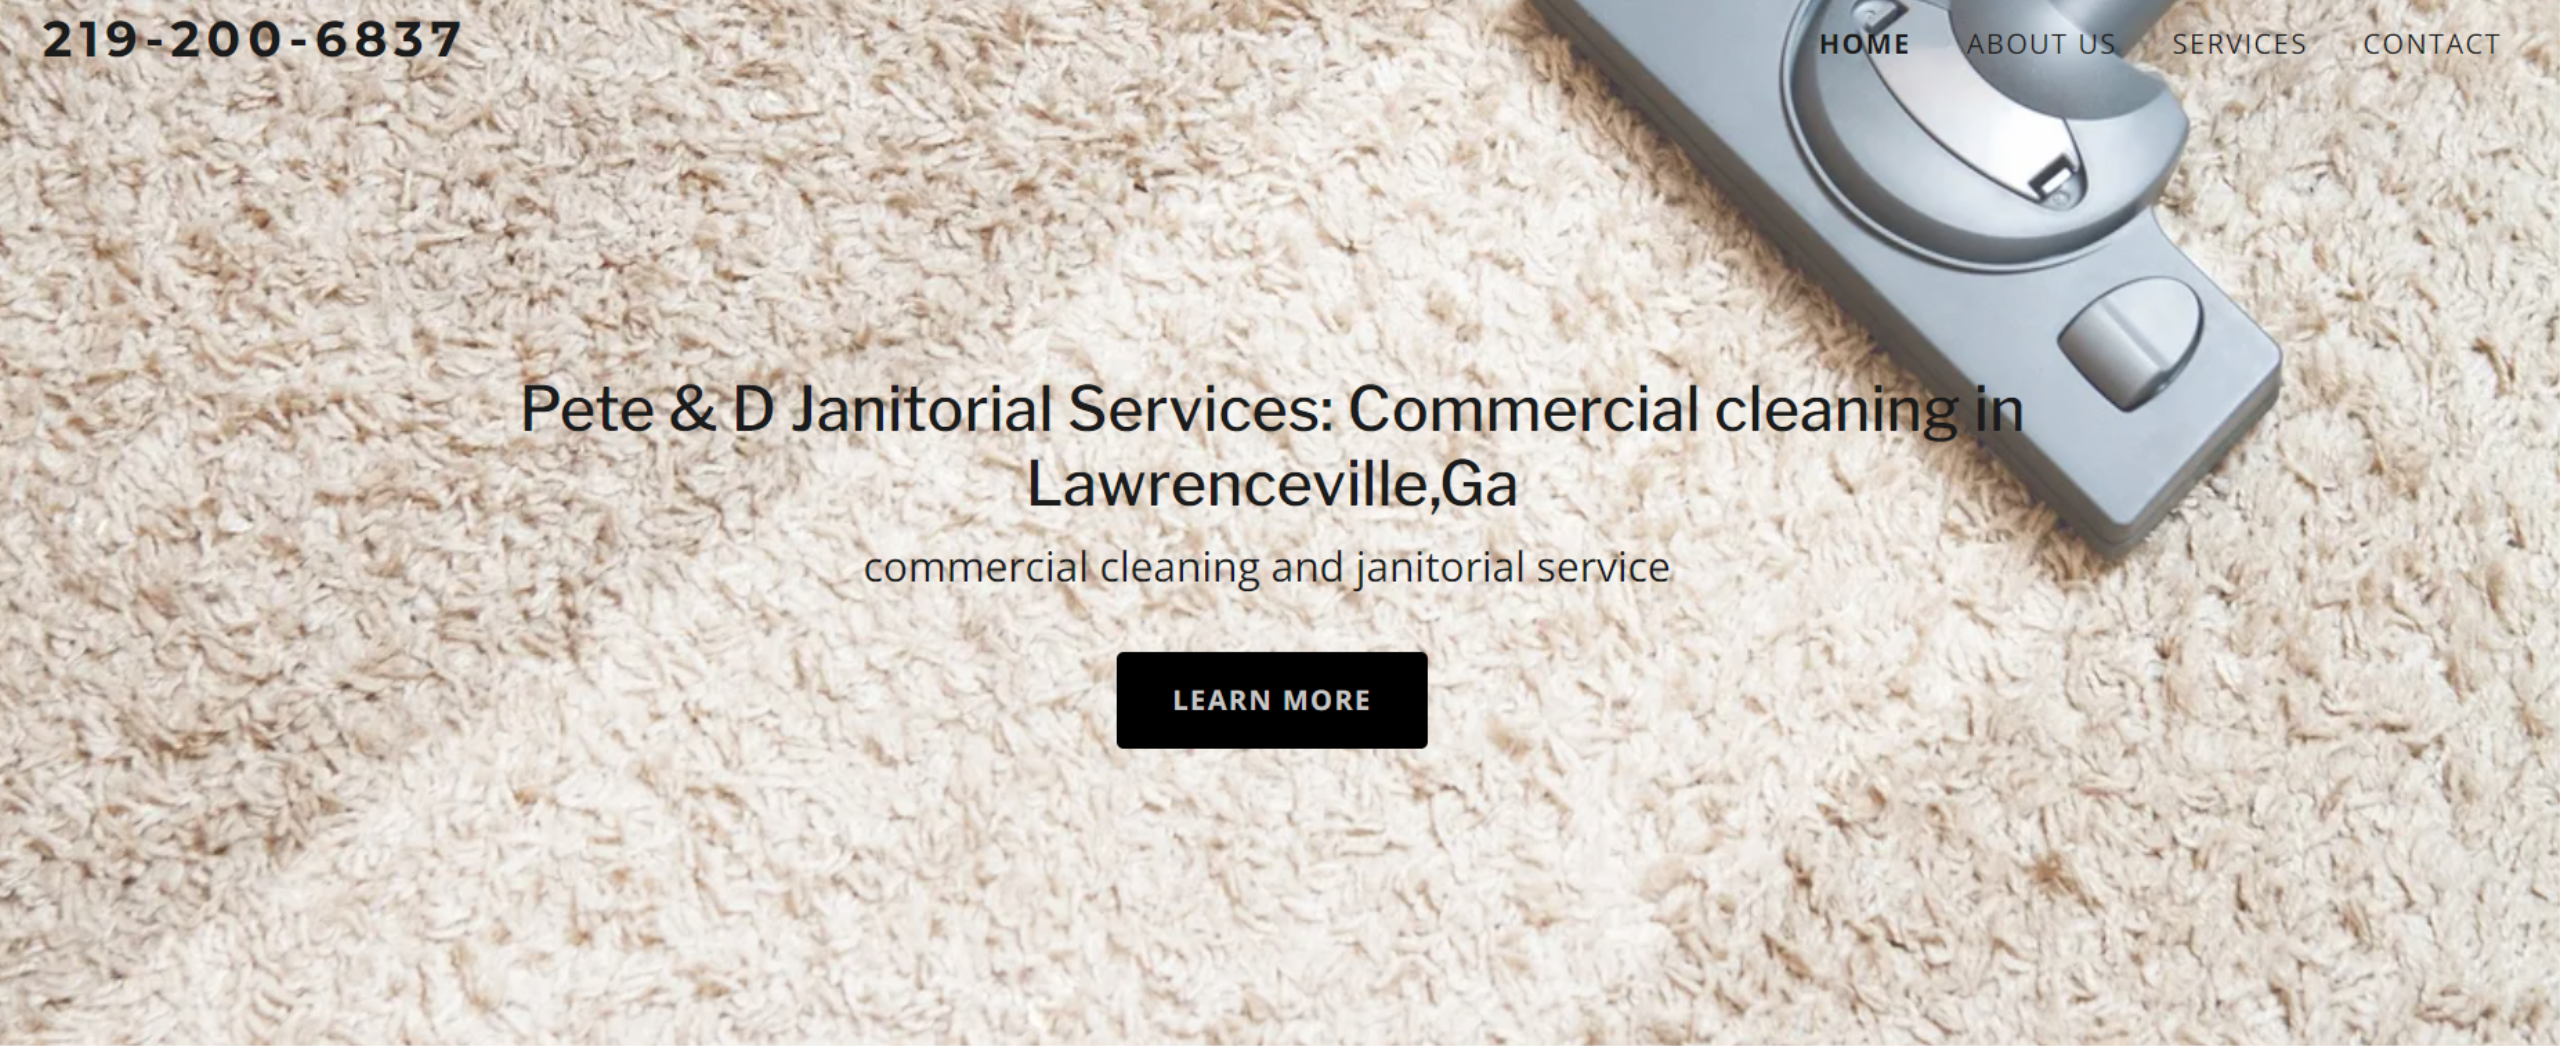 Pete & D Janitorial Cleaning Service, LLC Logo